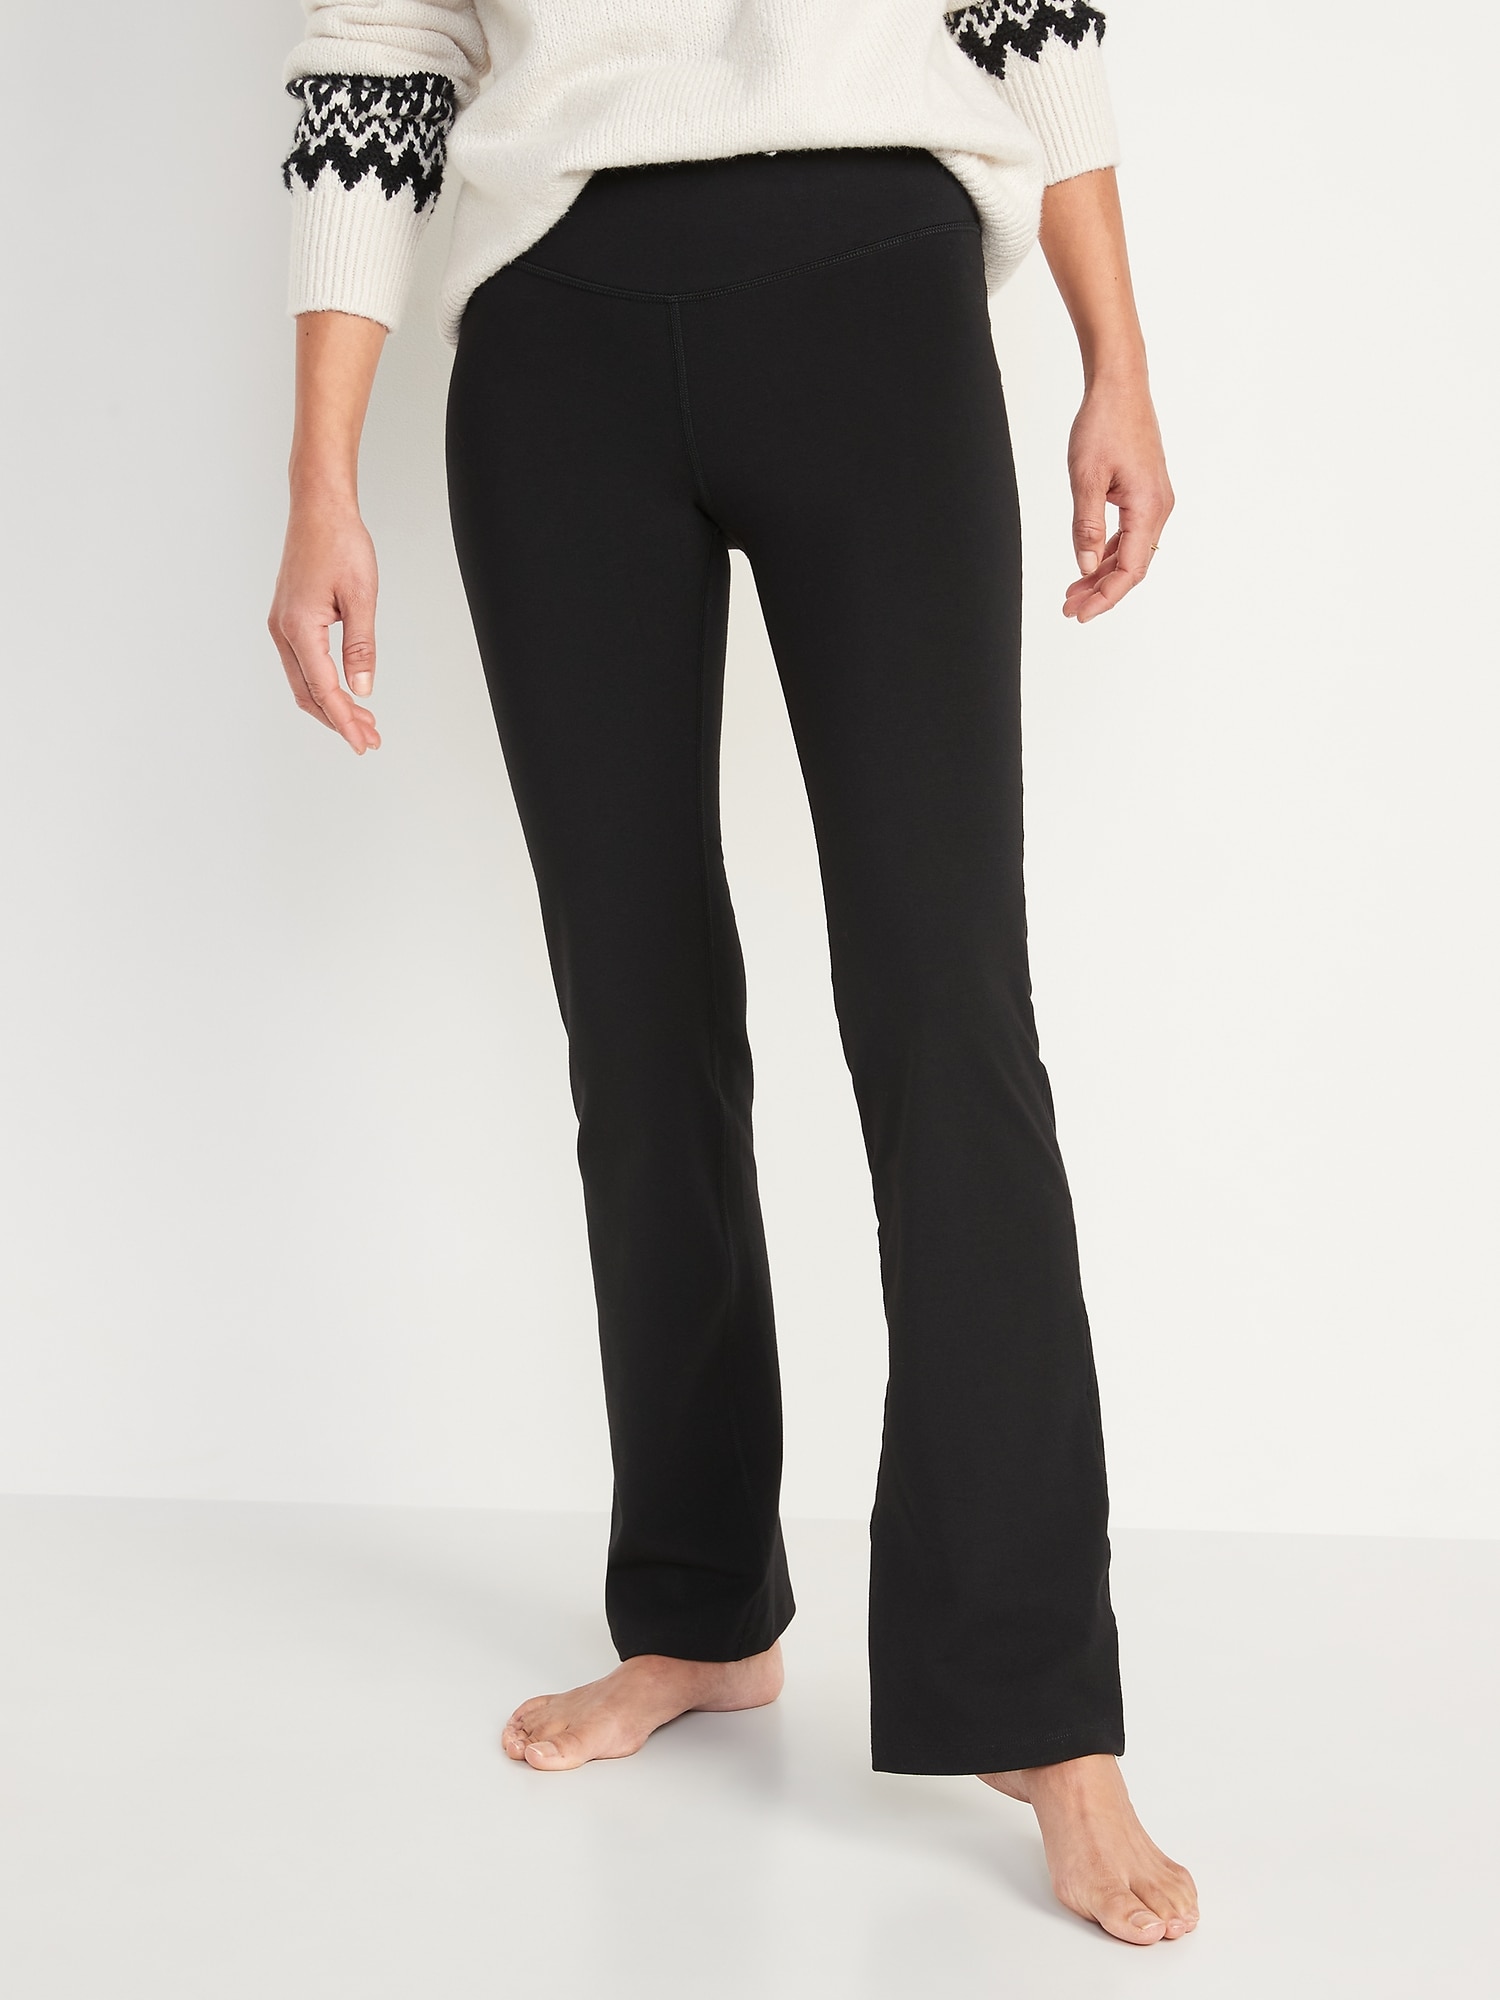 Extra High-Waisted PowerChill Boot-Cut Yoga Pants 2-Pack